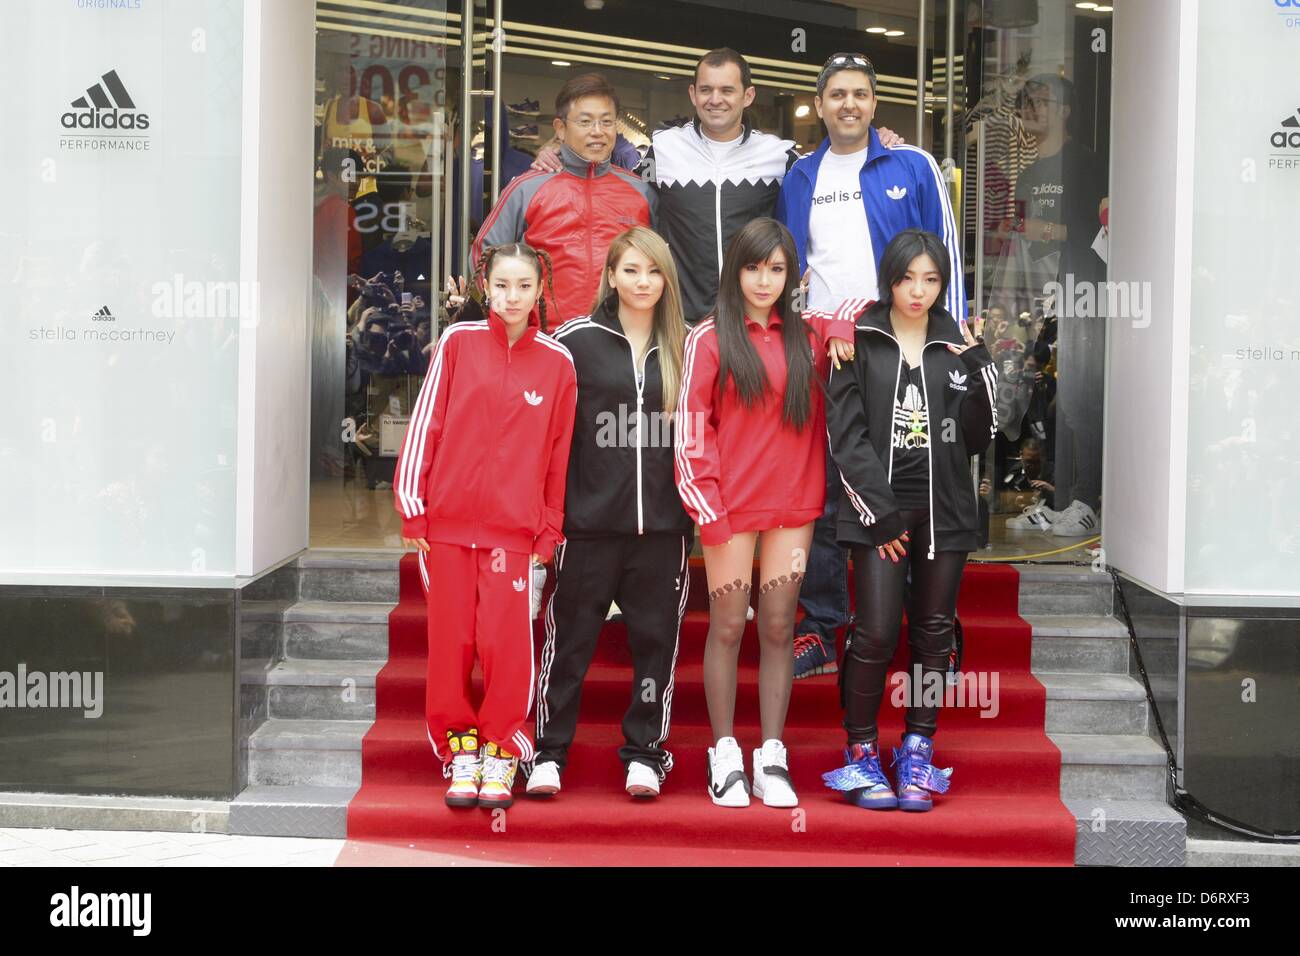 2NE1 attended opening ceremony of Adidas store in Seoul, South Korea on  Friday April 19, 2013 Stock Photo - Alamy